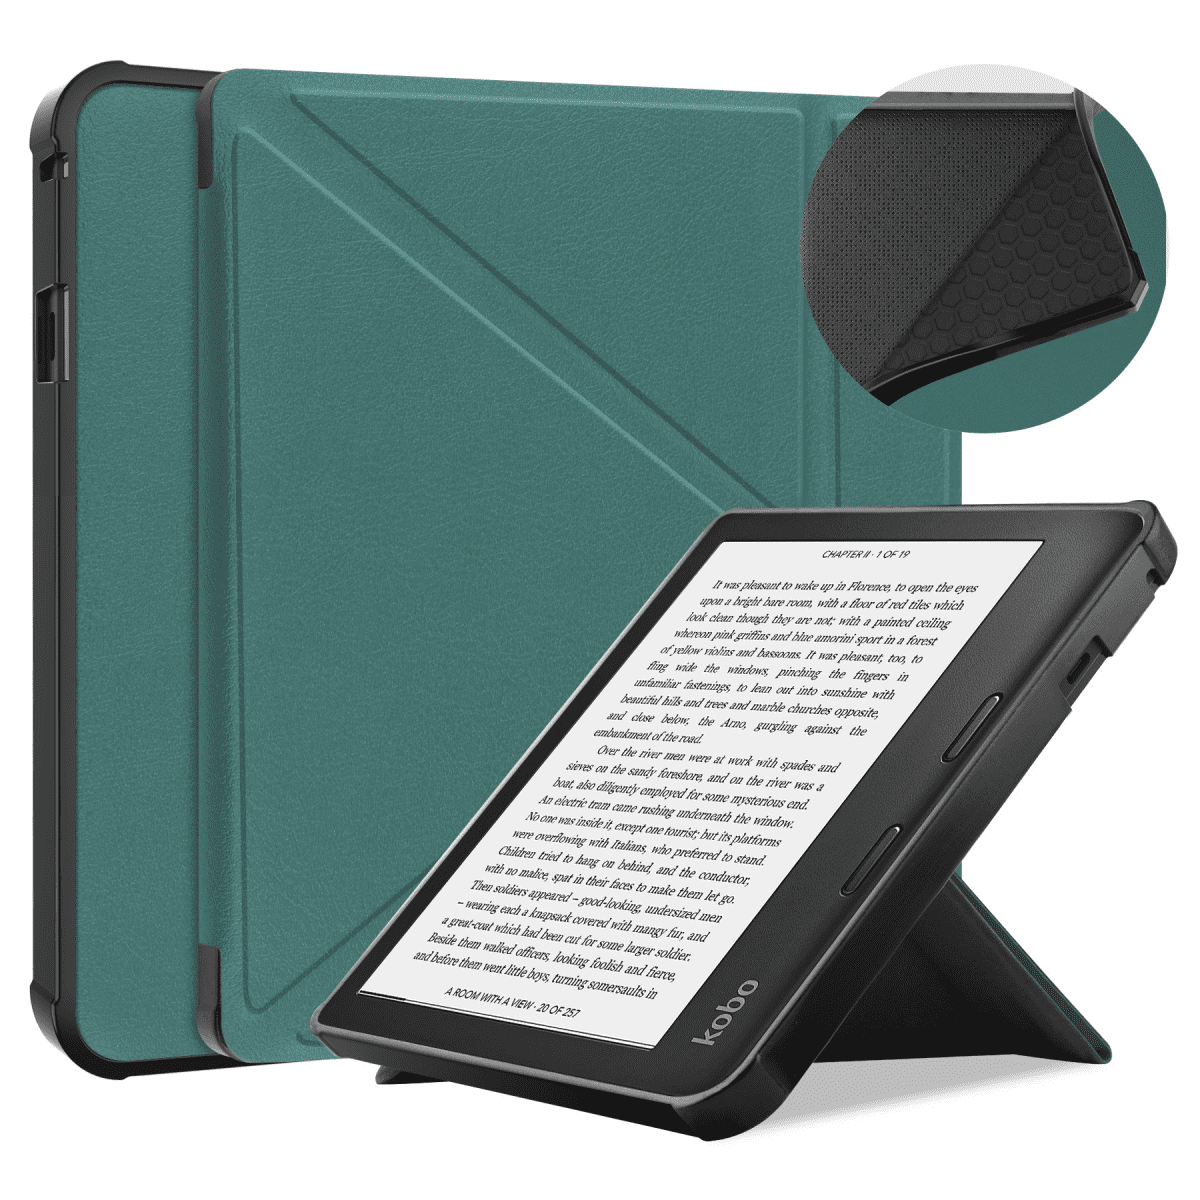 Niet ingewikkeld seinpaal Vluchtig SAYTAY For Kobo Sage 8" E-Reader Released 2021, Soft TPU Matte Back Cover,  Slim Smart Folio Cover with Magnetic Closure and Stand - Green - Walmart.com